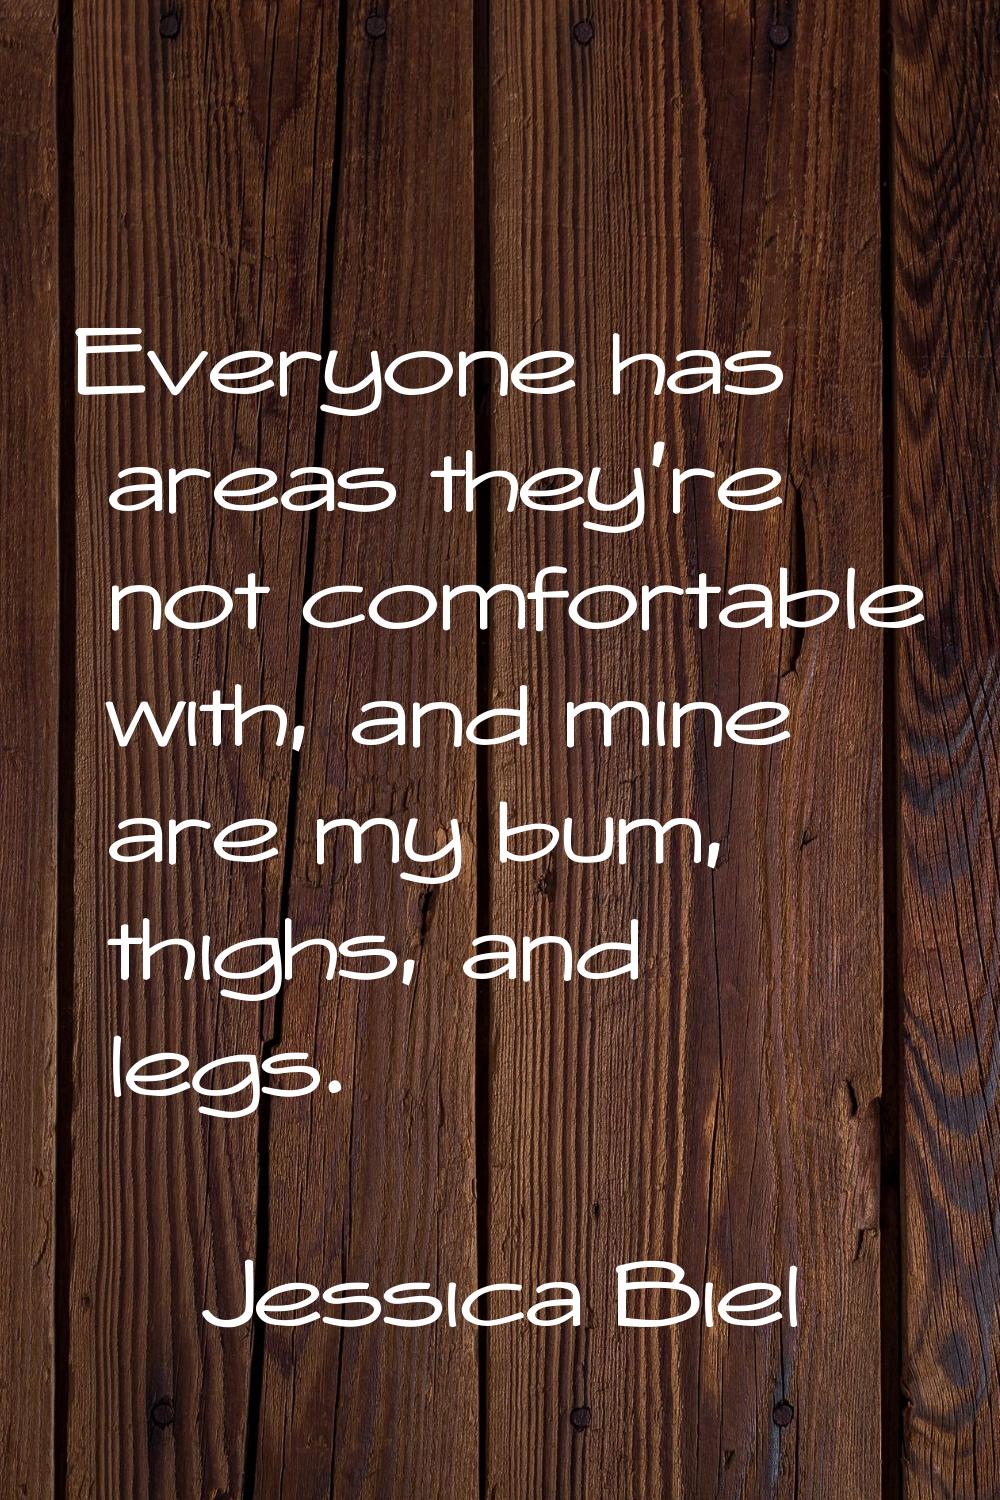 Everyone has areas they're not comfortable with, and mine are my bum, thighs, and legs.